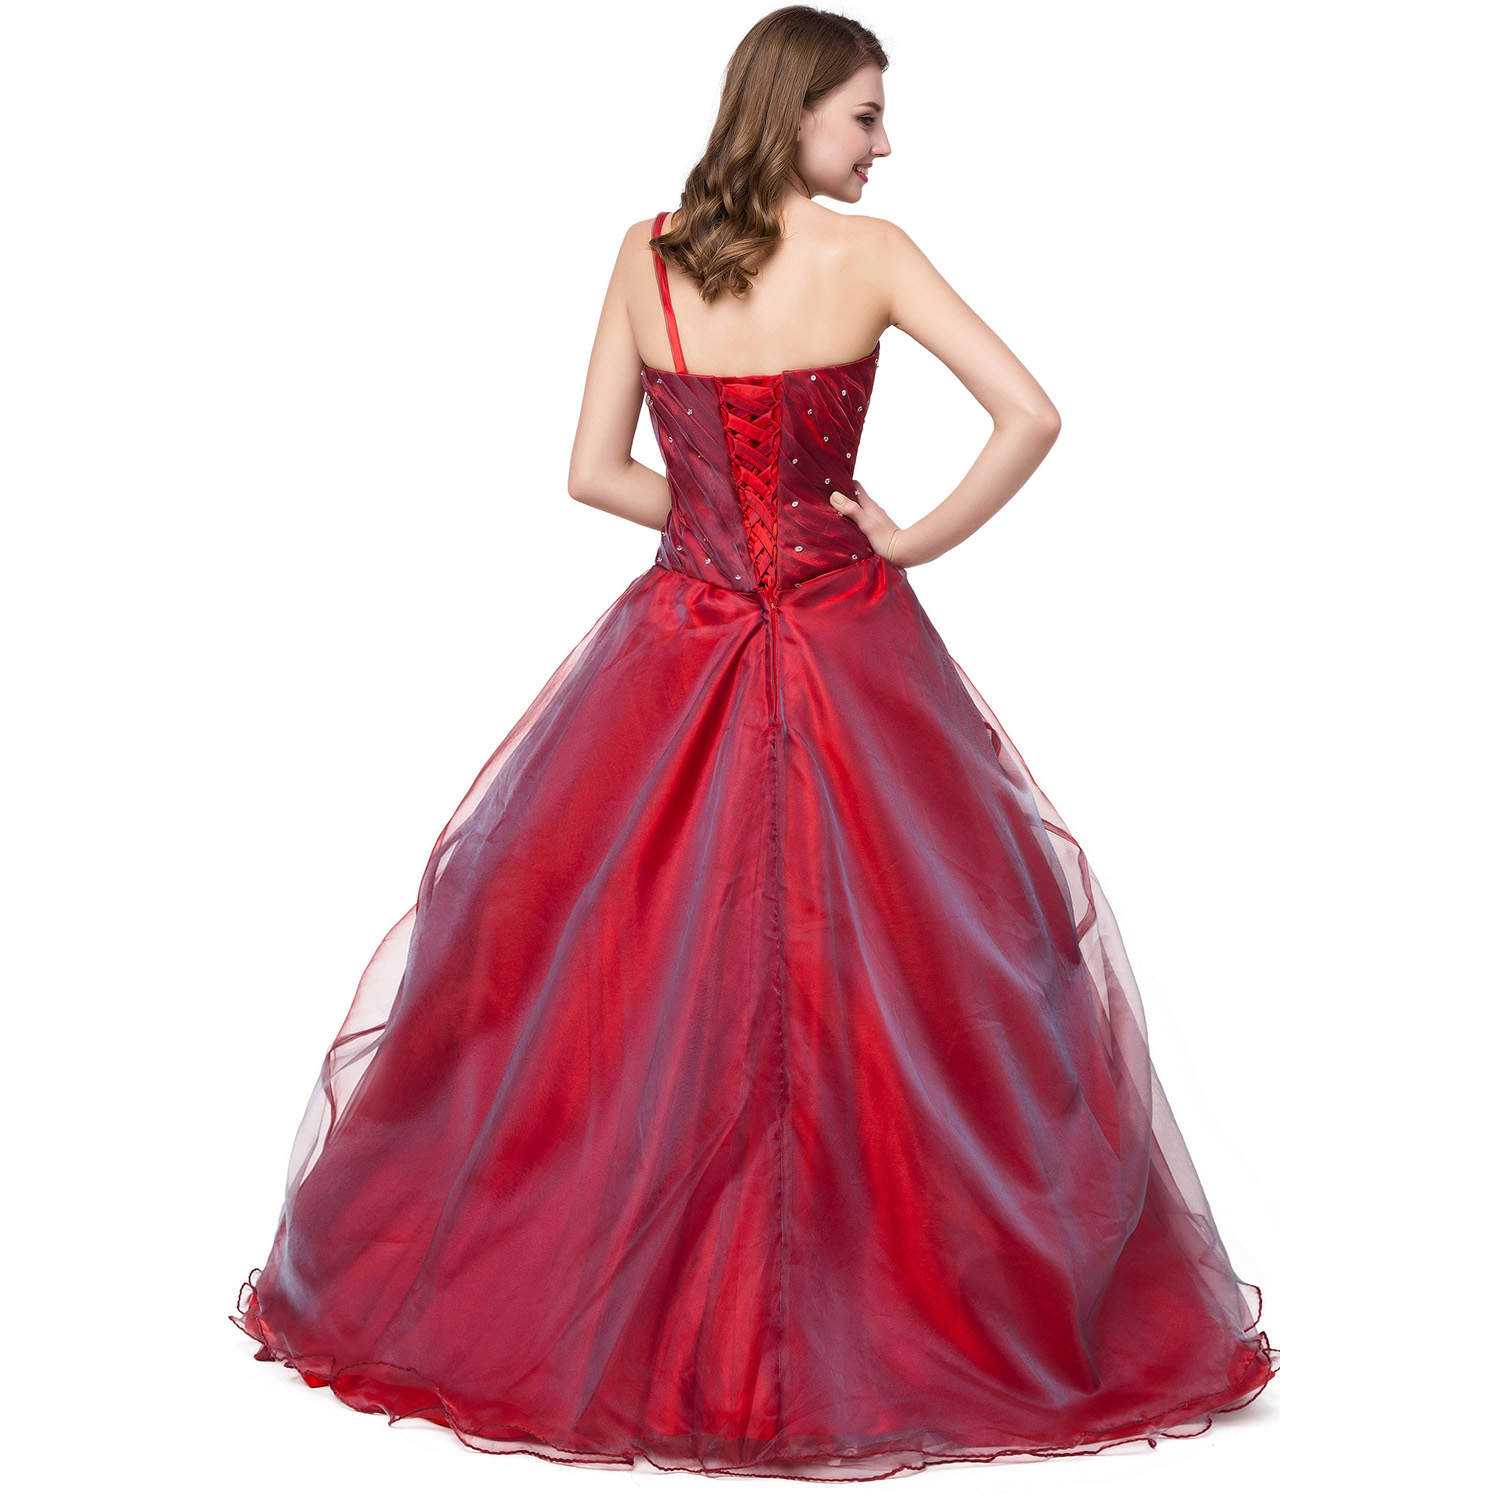 Elegant Long Red Prom Dresses Featuring Floral One Shoulder And Ruched ...